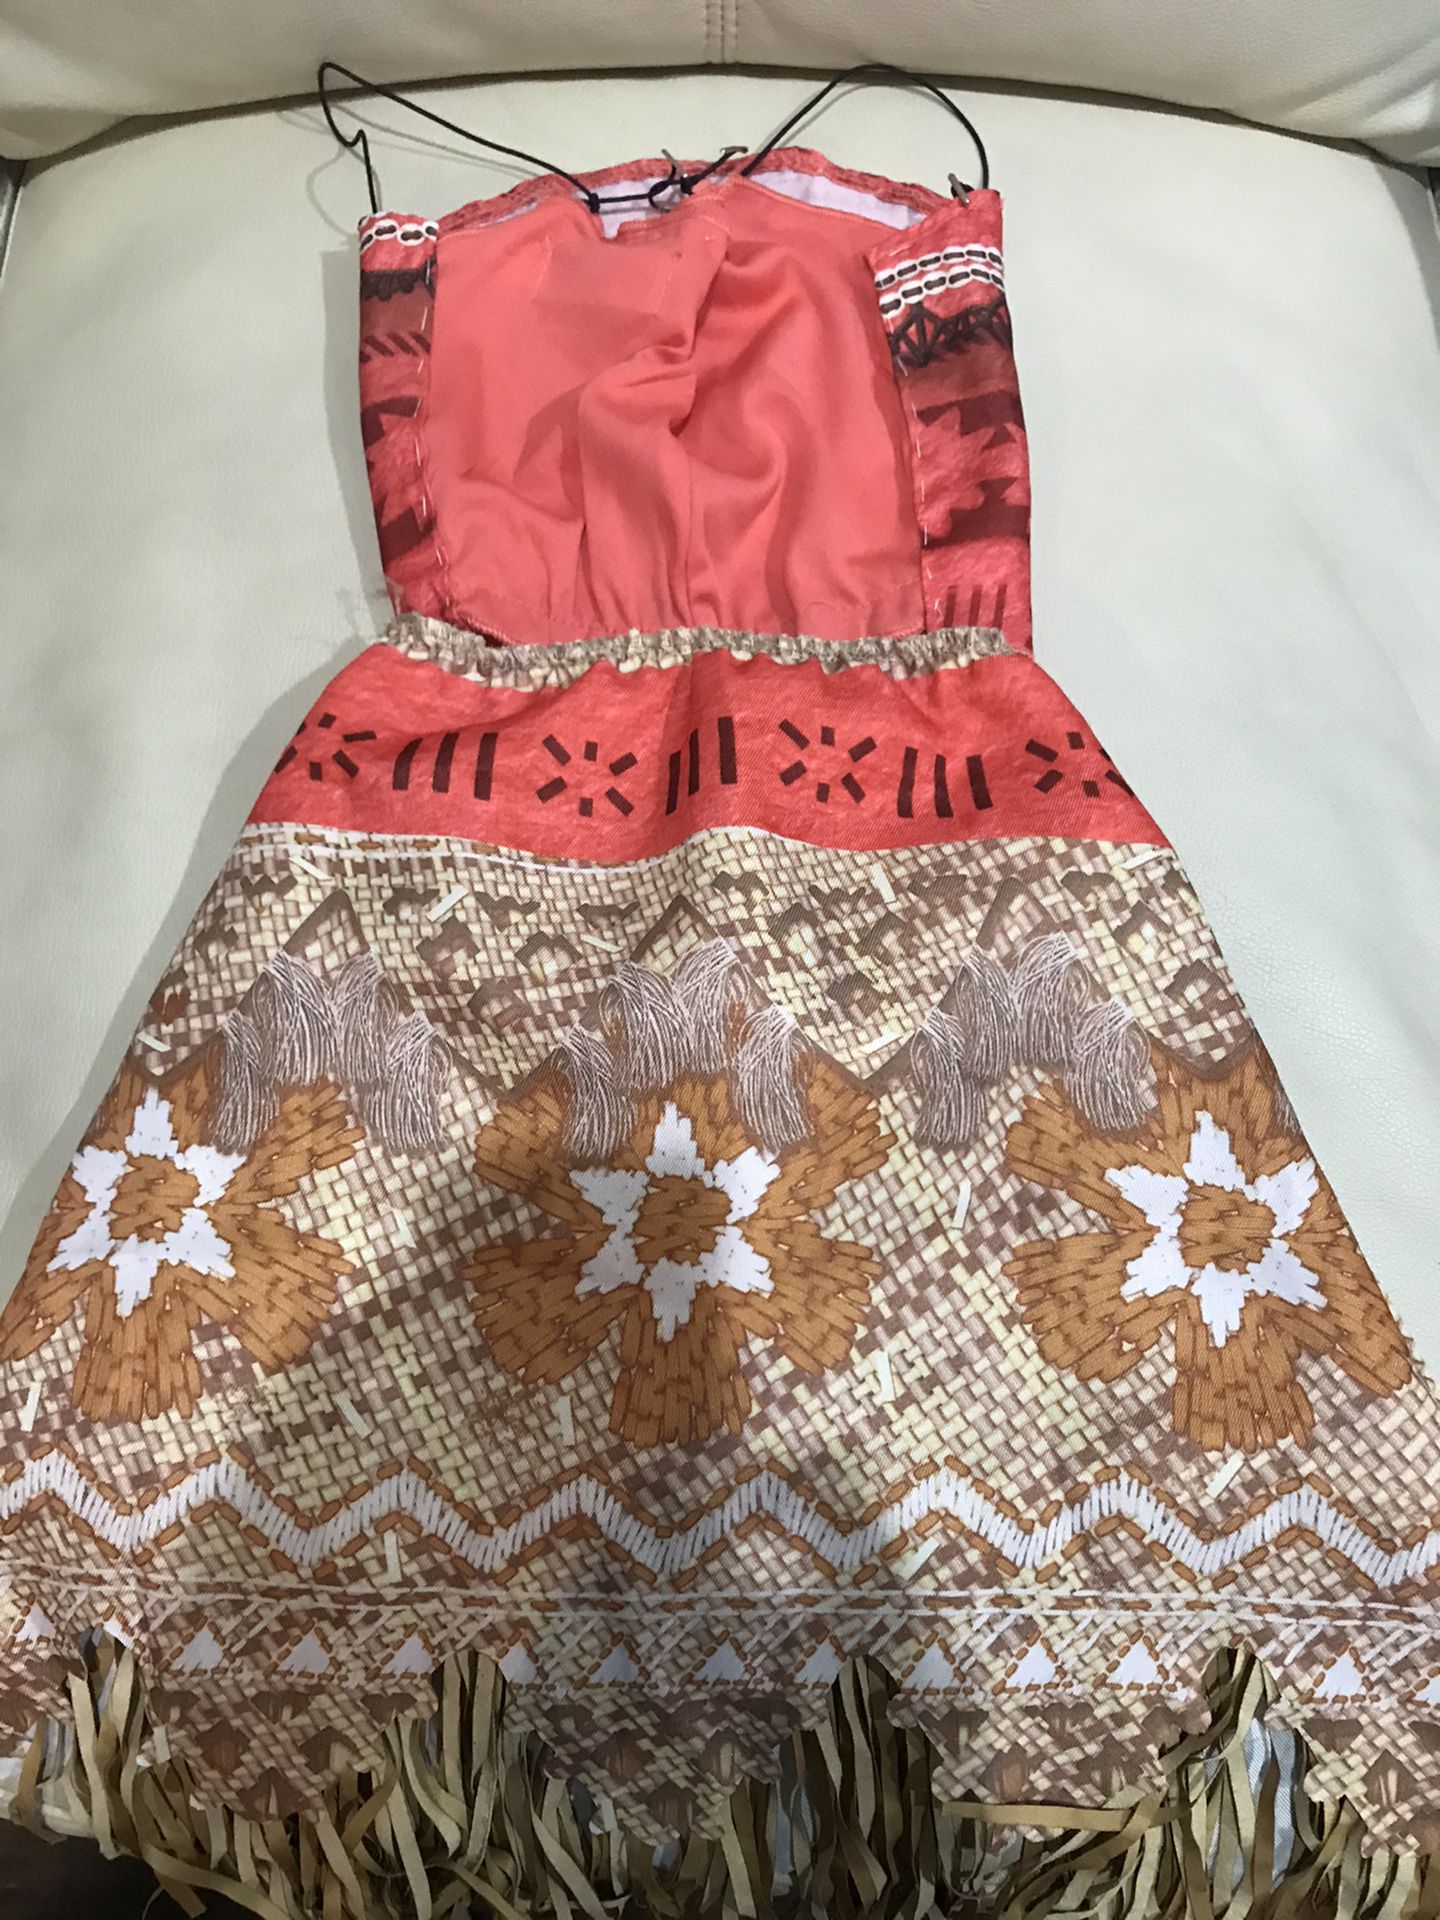 Moana outfit- used only once